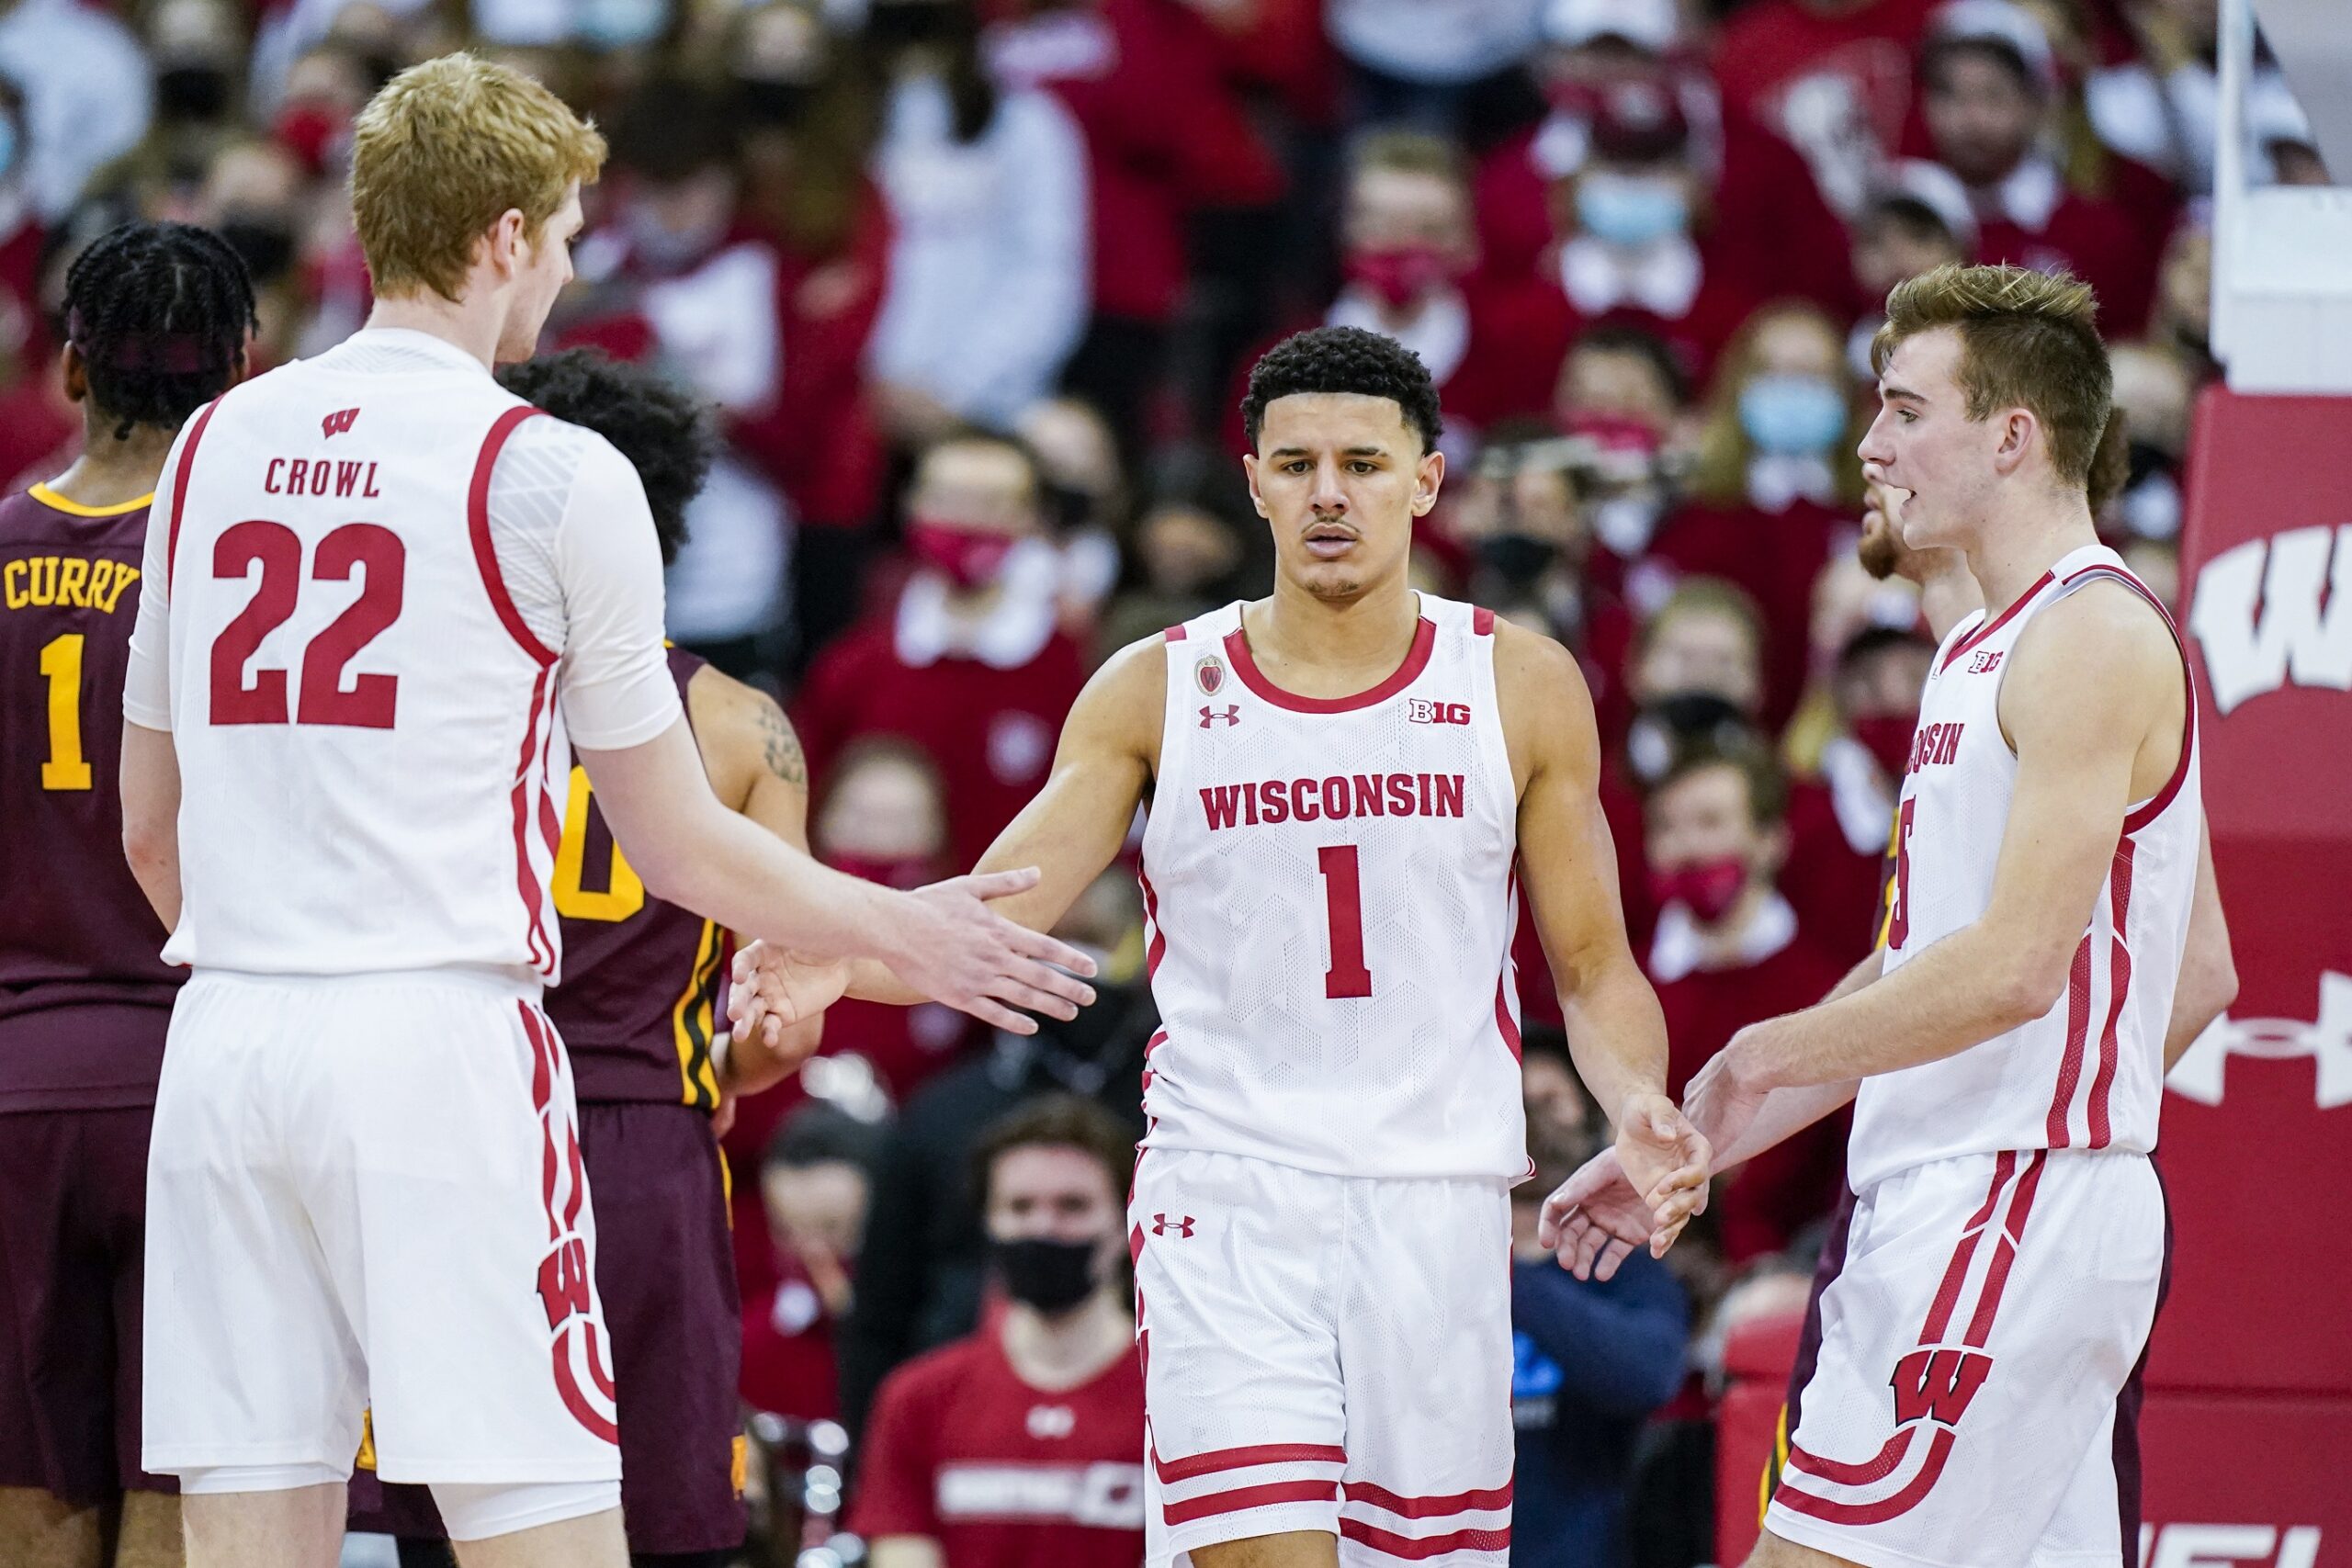 La Crosse’s Johnny Davis declares for NBA draft, after two seasons with Badgers